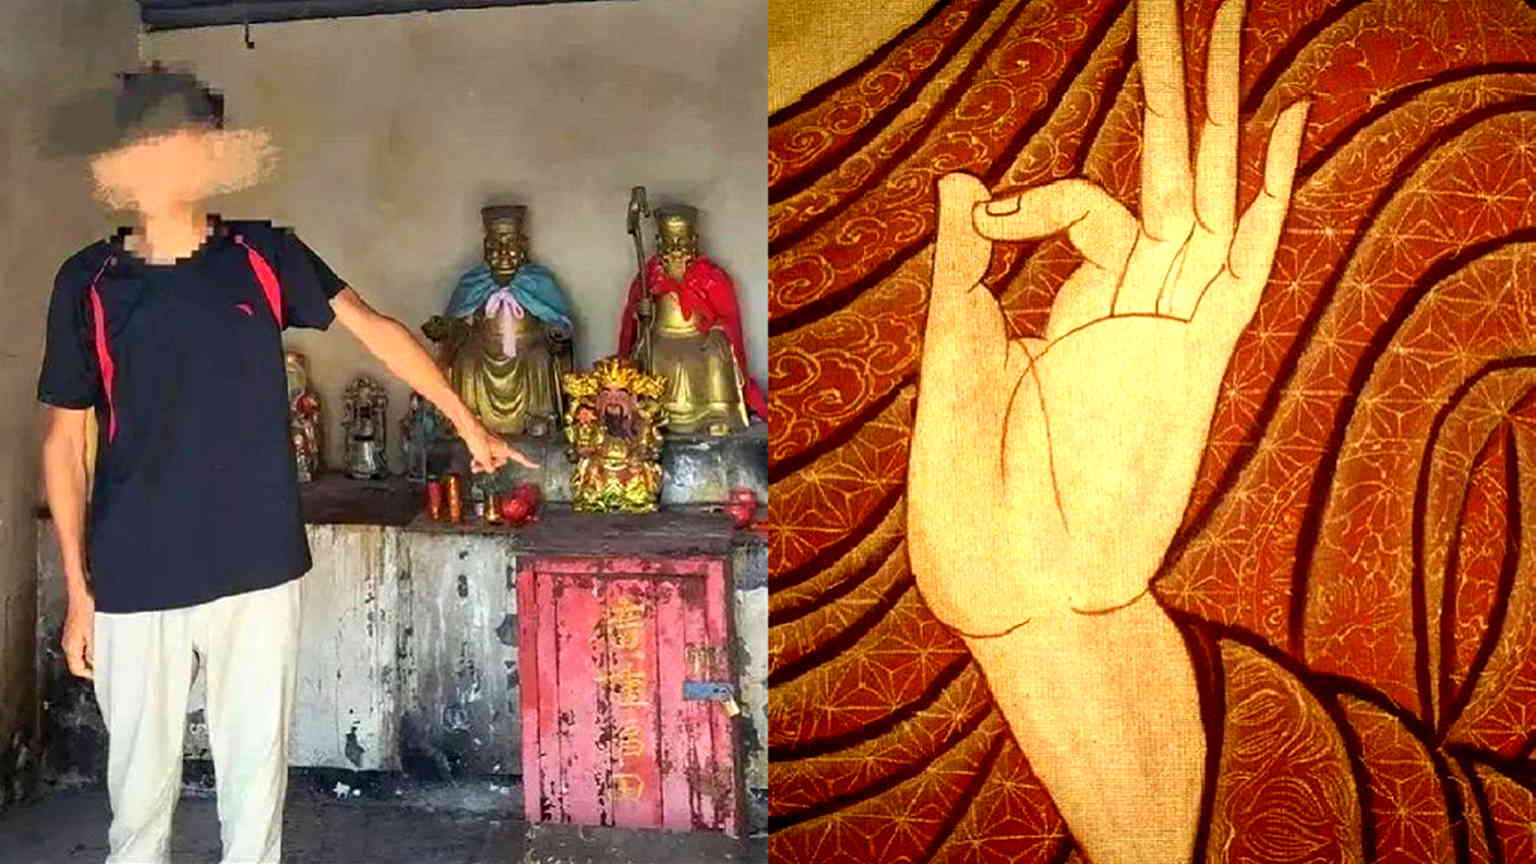 Temple thief claims Buddha gave him an ‘OK’ sign to take donation money